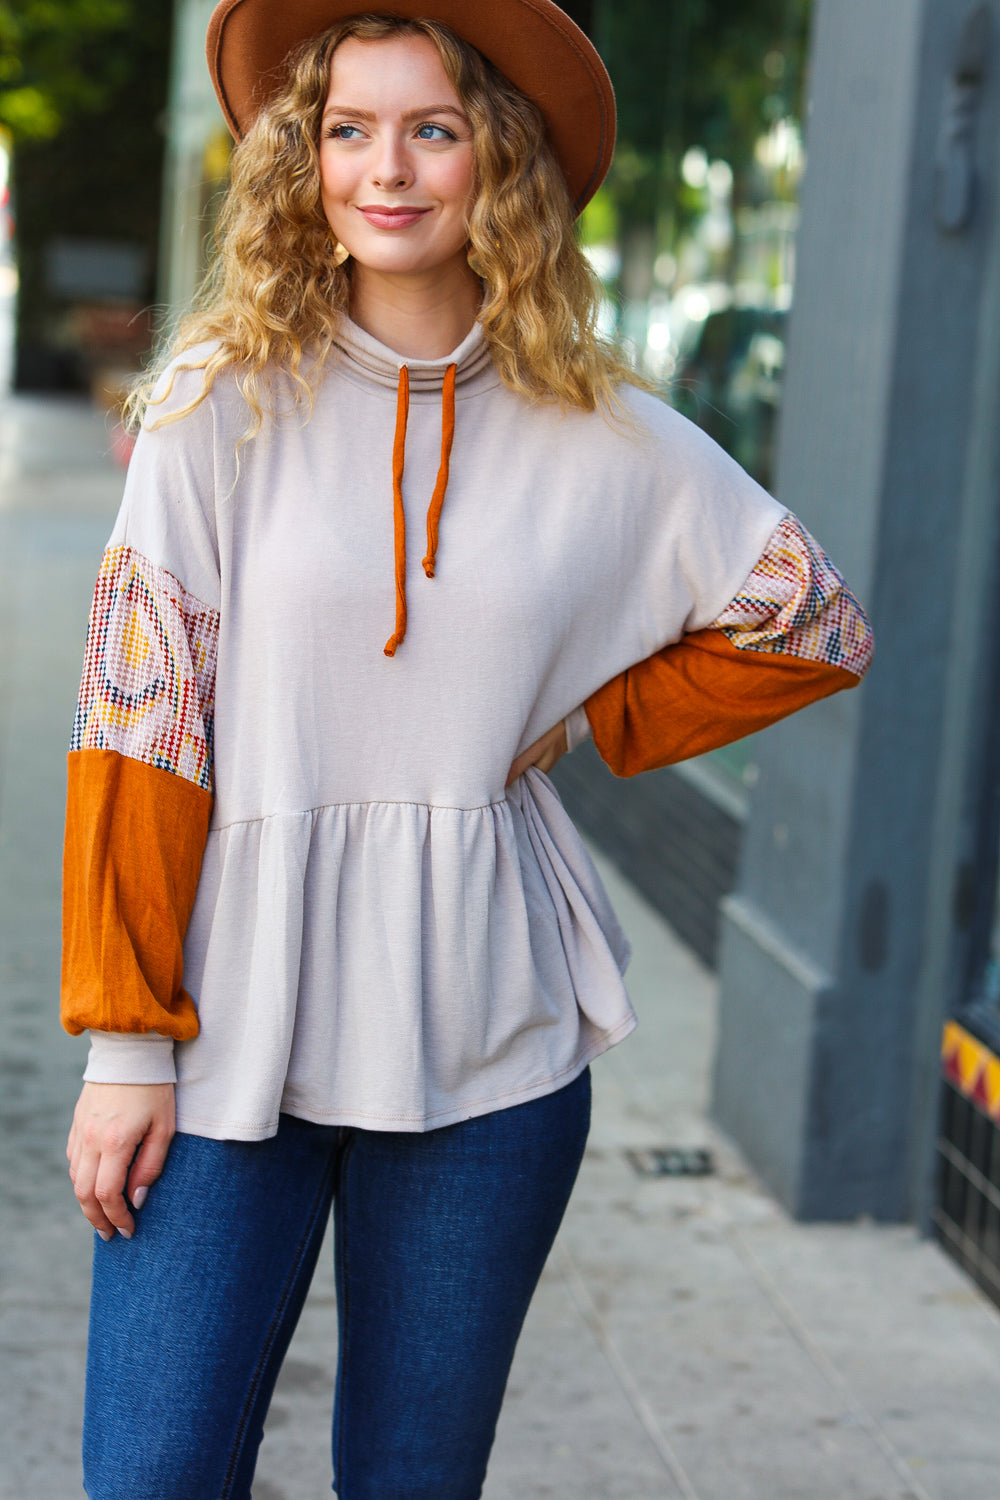 Easy Days Ahead Taupe/Rust Turtleneck Babydoll Terry Top